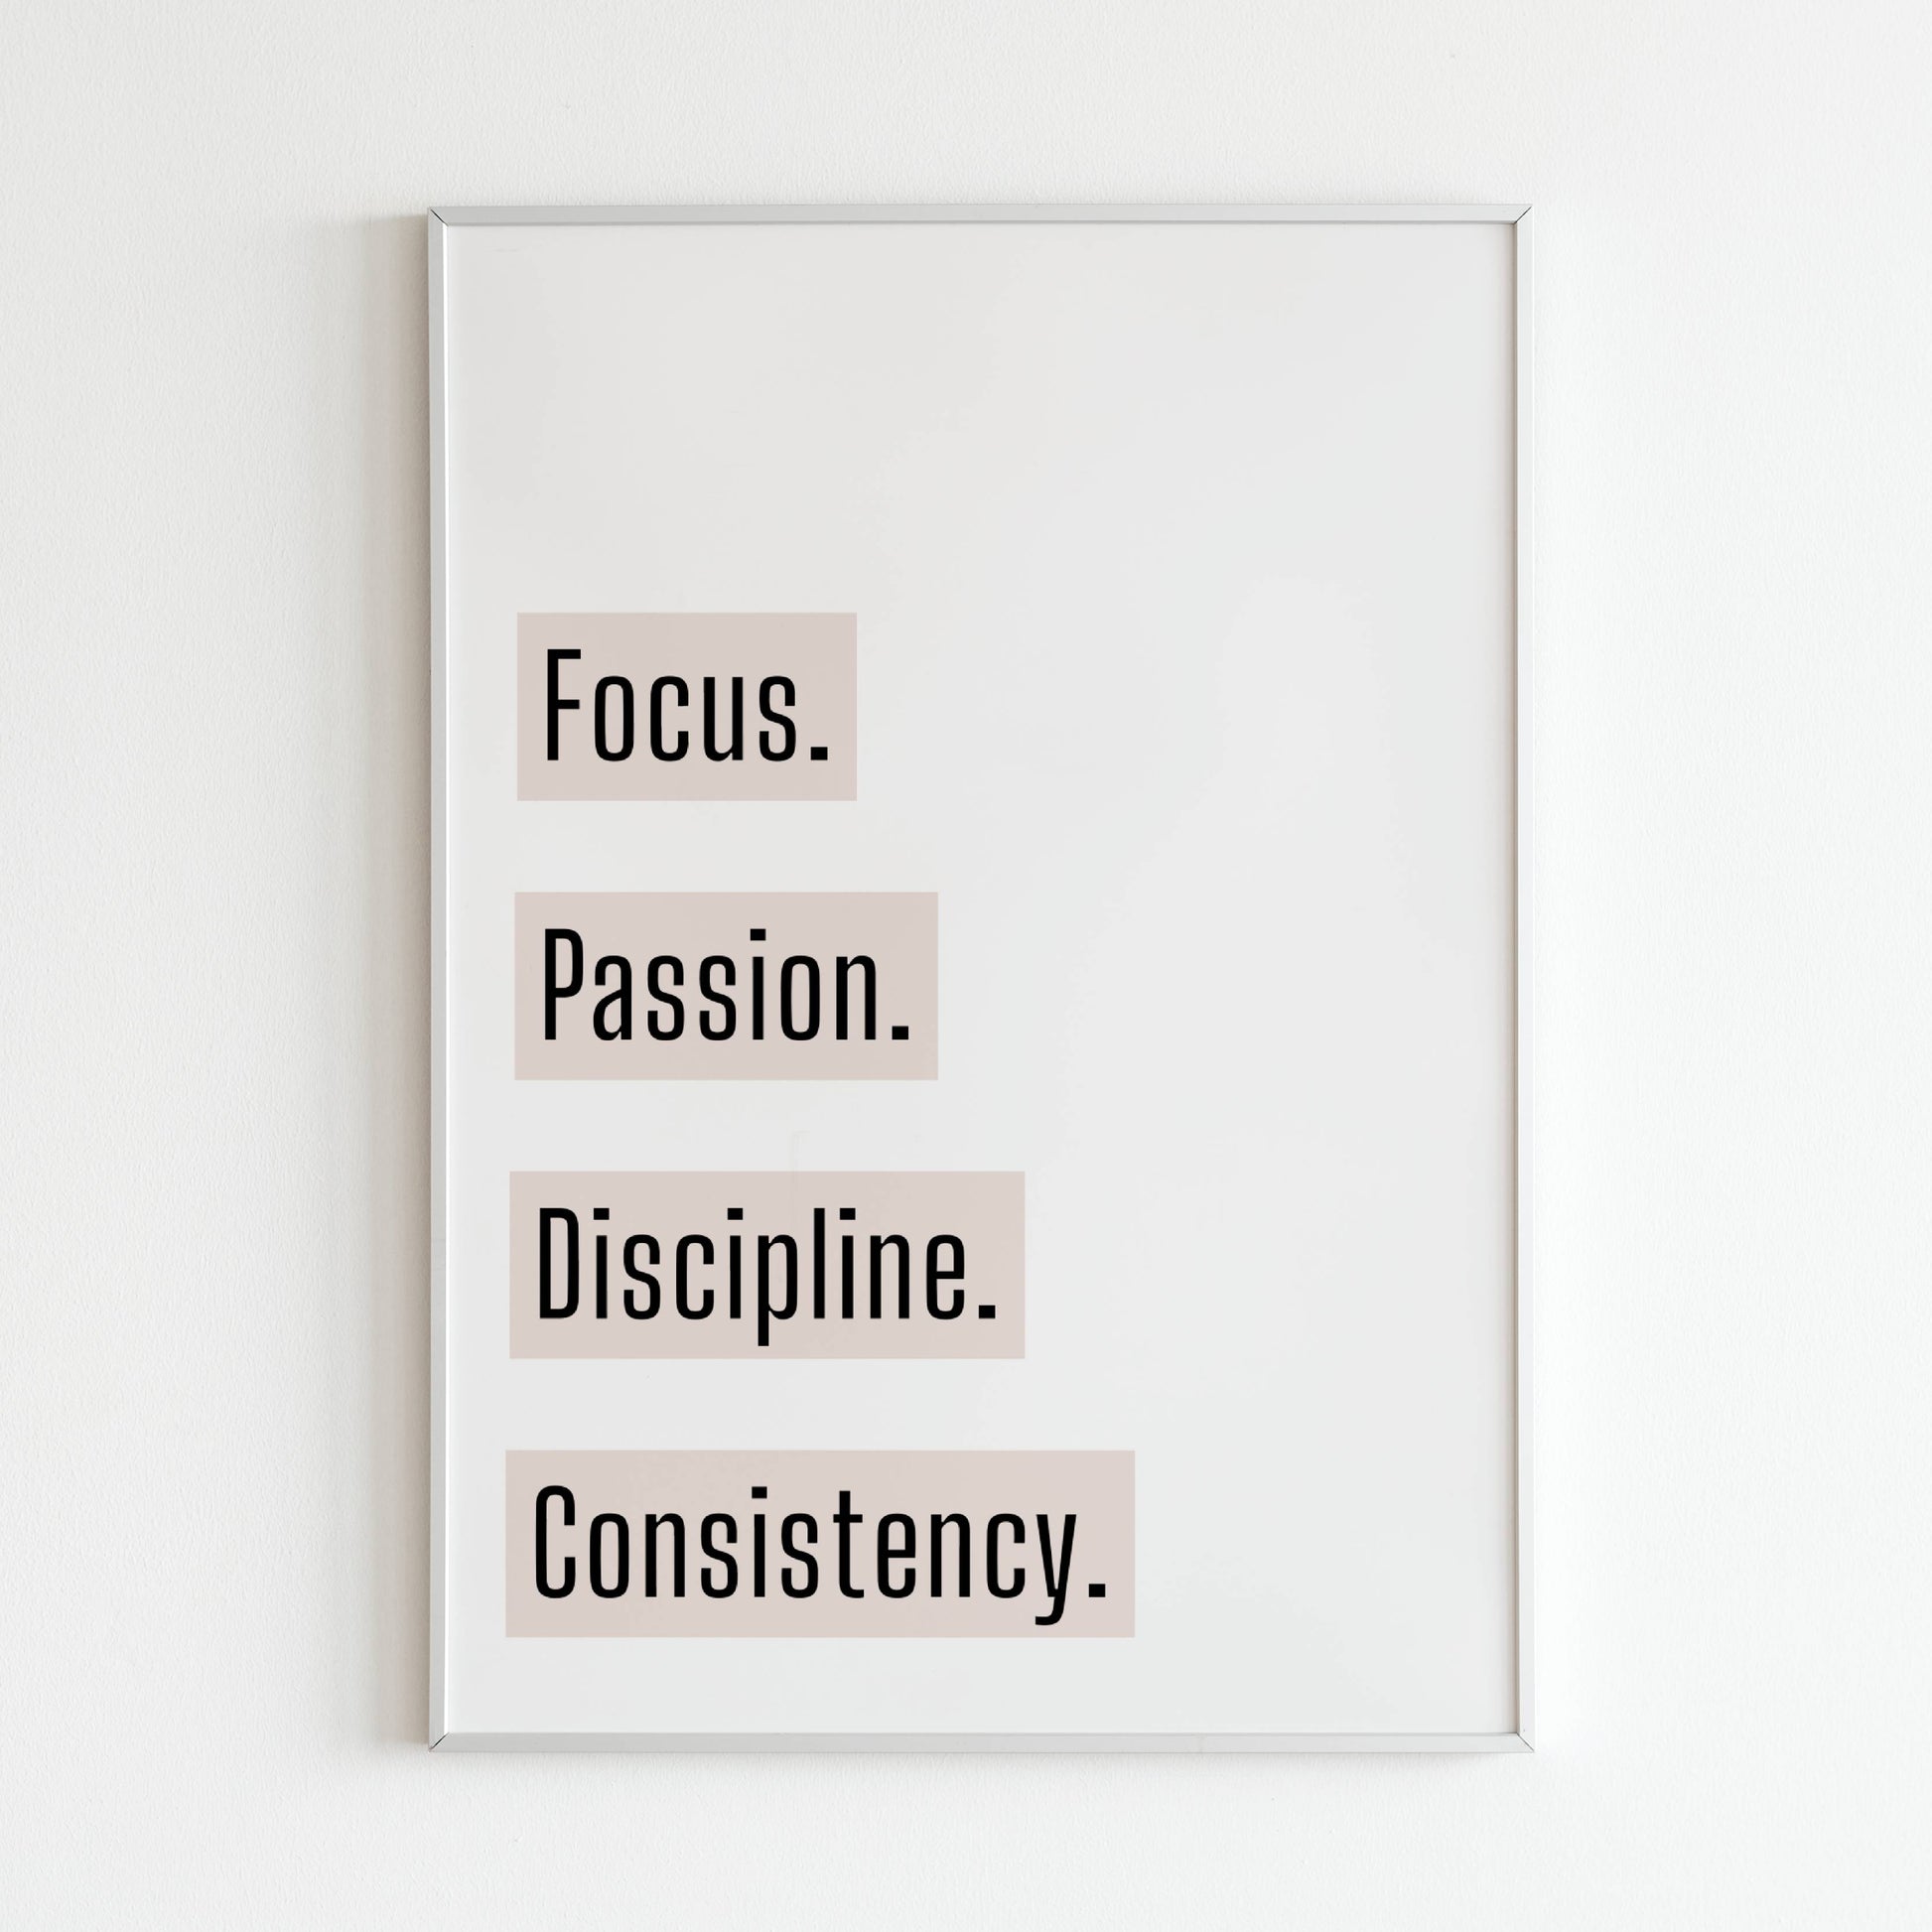 Downloadable inspirational wall art promoting key elements for success